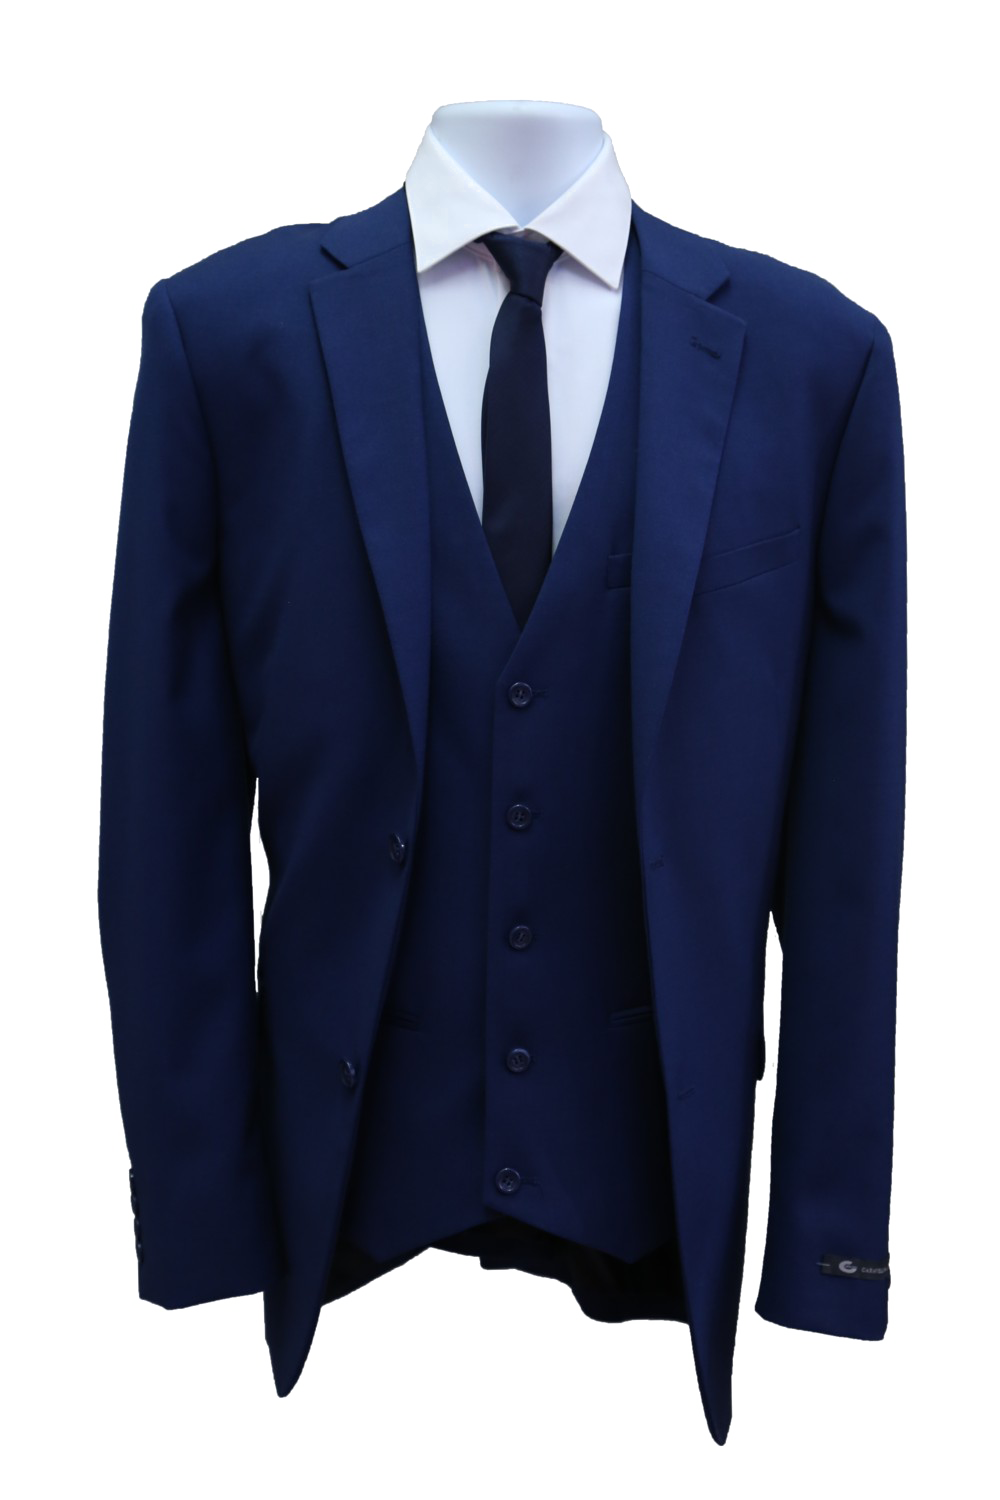 Blue suit PNG Background ng Imahe